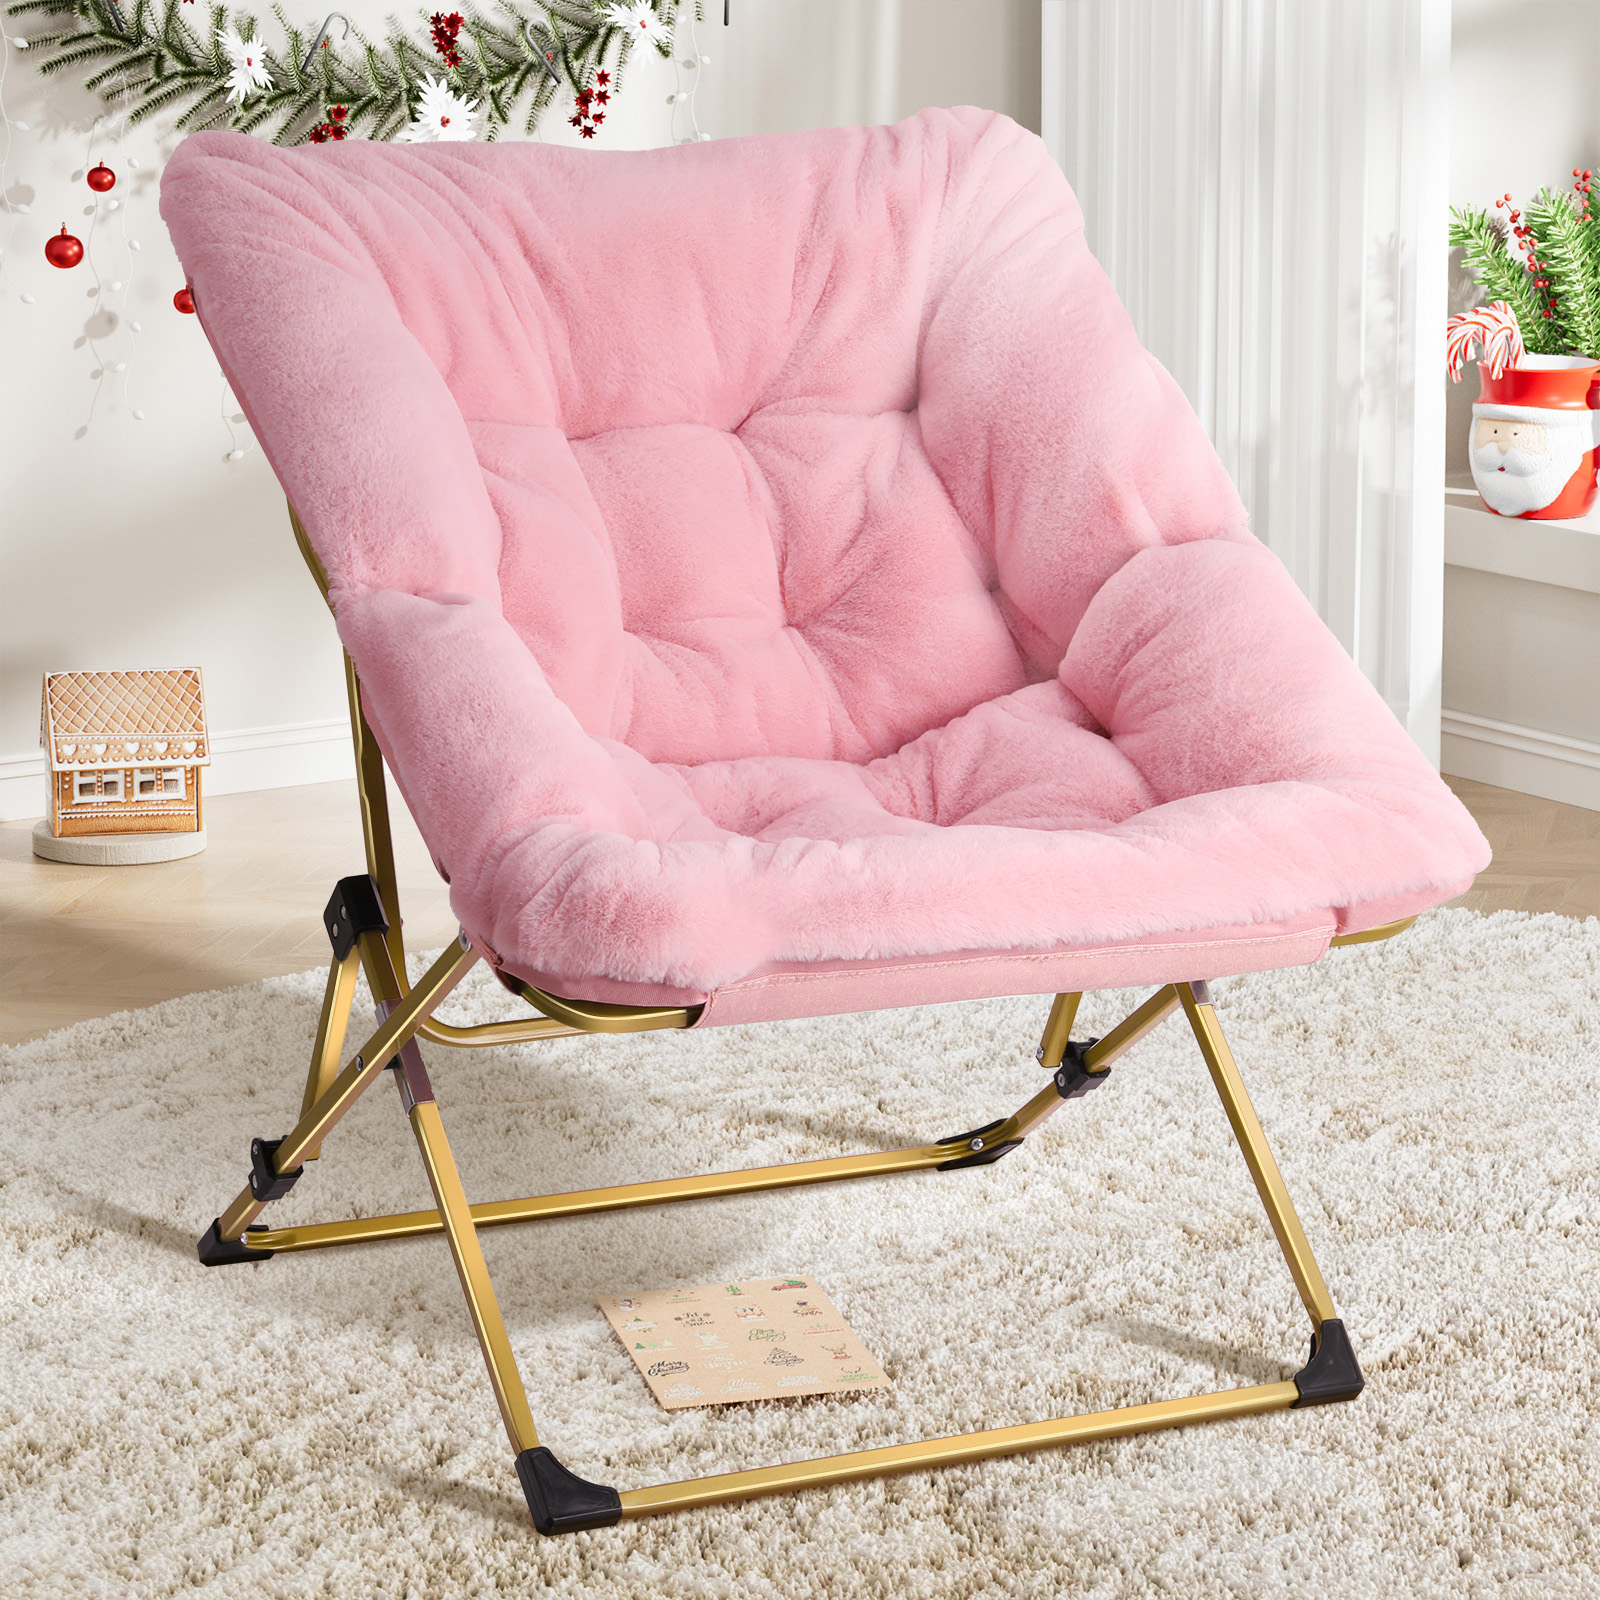 GIKPAL Saucer Chair, Comfy Bedroom Chairs, Oversized Folding Faux Fur Chair for Living Room, Balcony and Study, Flexible Seating Chair for Kids Teens Adults, Pink - image 1 of 8